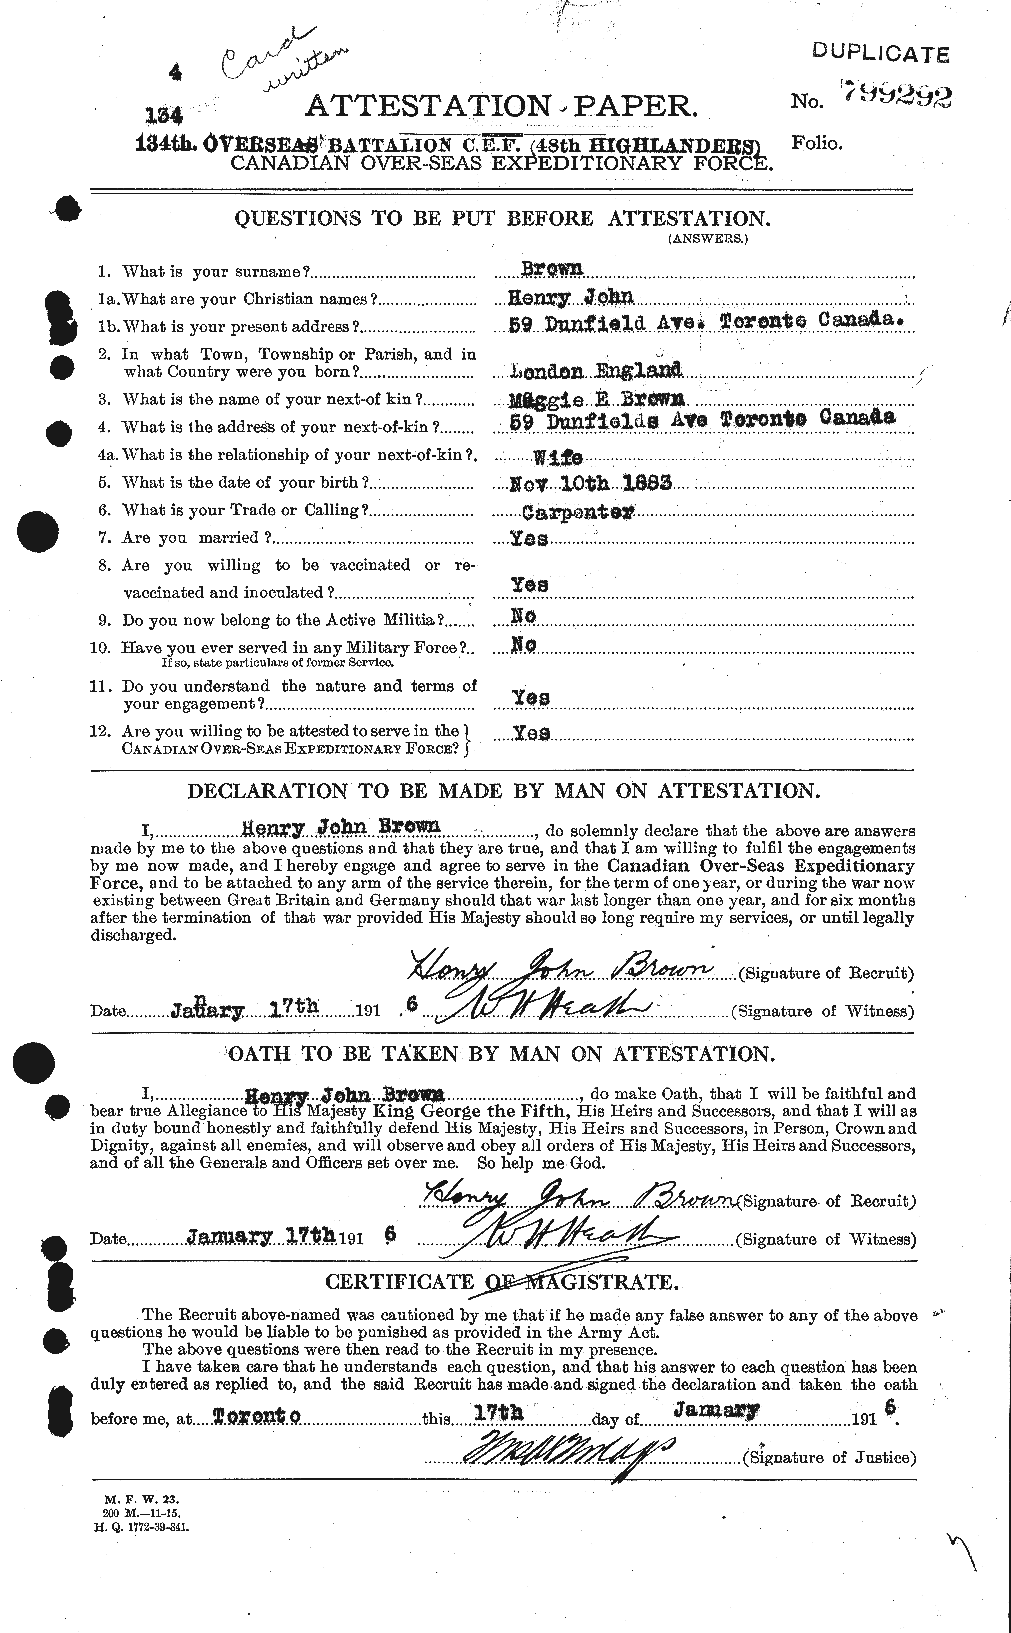 Personnel Records of the First World War - CEF 200659a